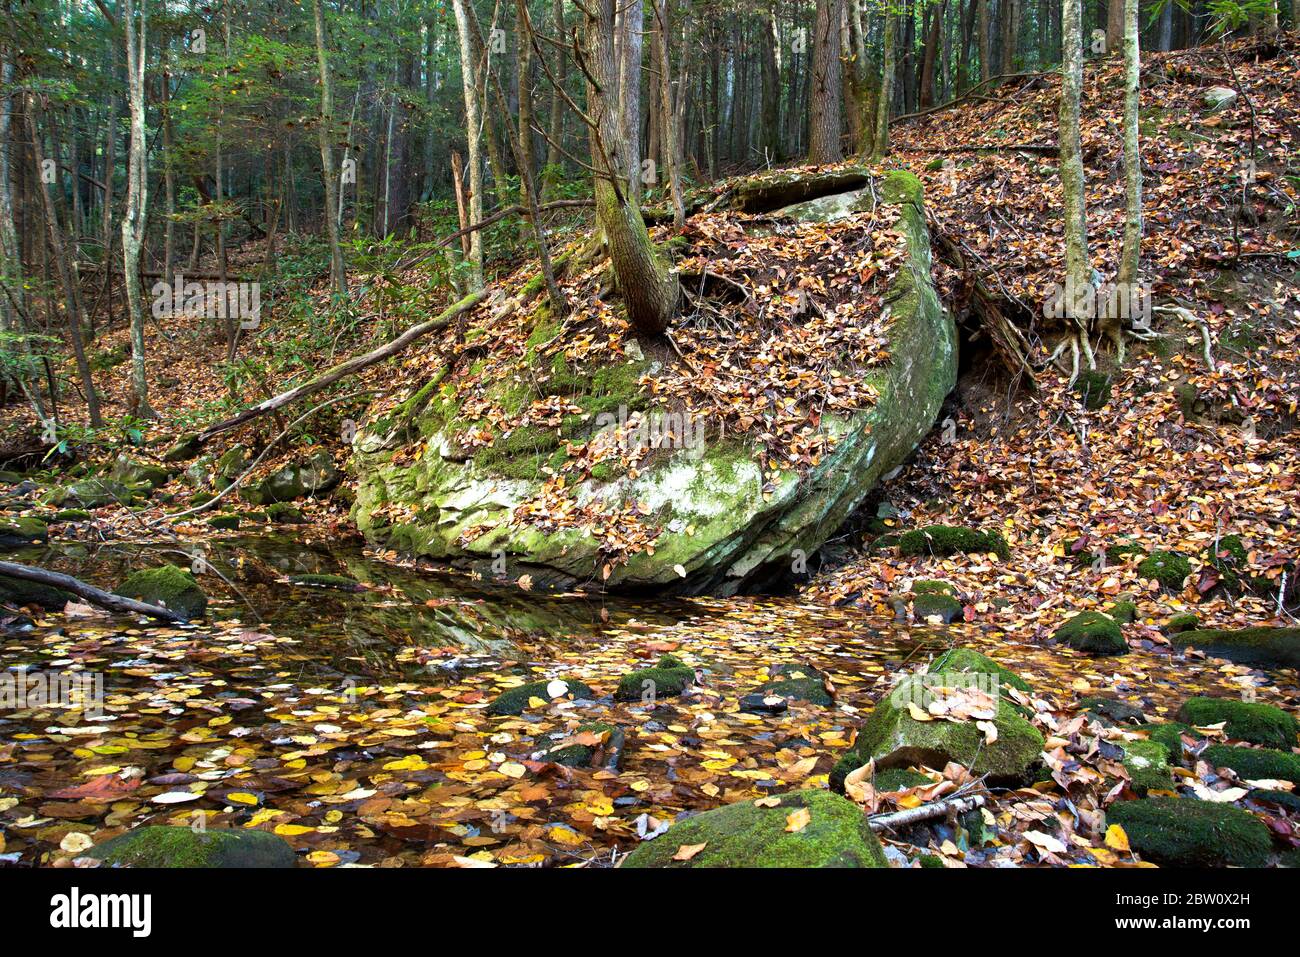 A tree grows on a boulder on Bad Branch in Bad Branch State Nature Preserve near Eolia, Kentucky. Stock Photo